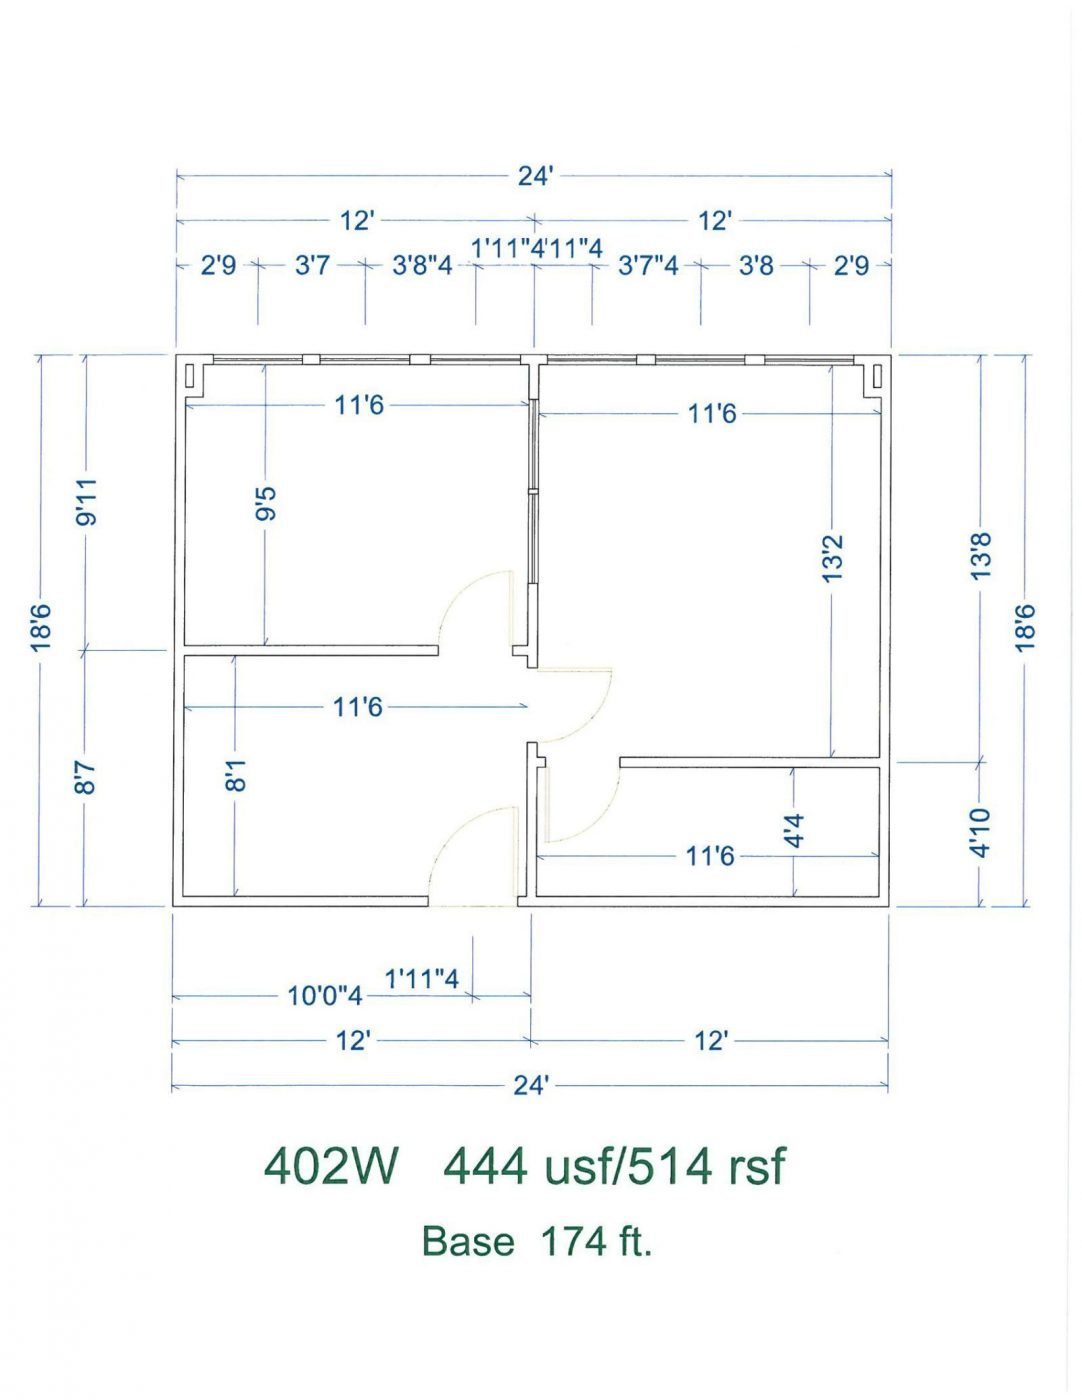 Floor Plan for unit 402W at 15565 Northland Dr Southfield, MI 48075